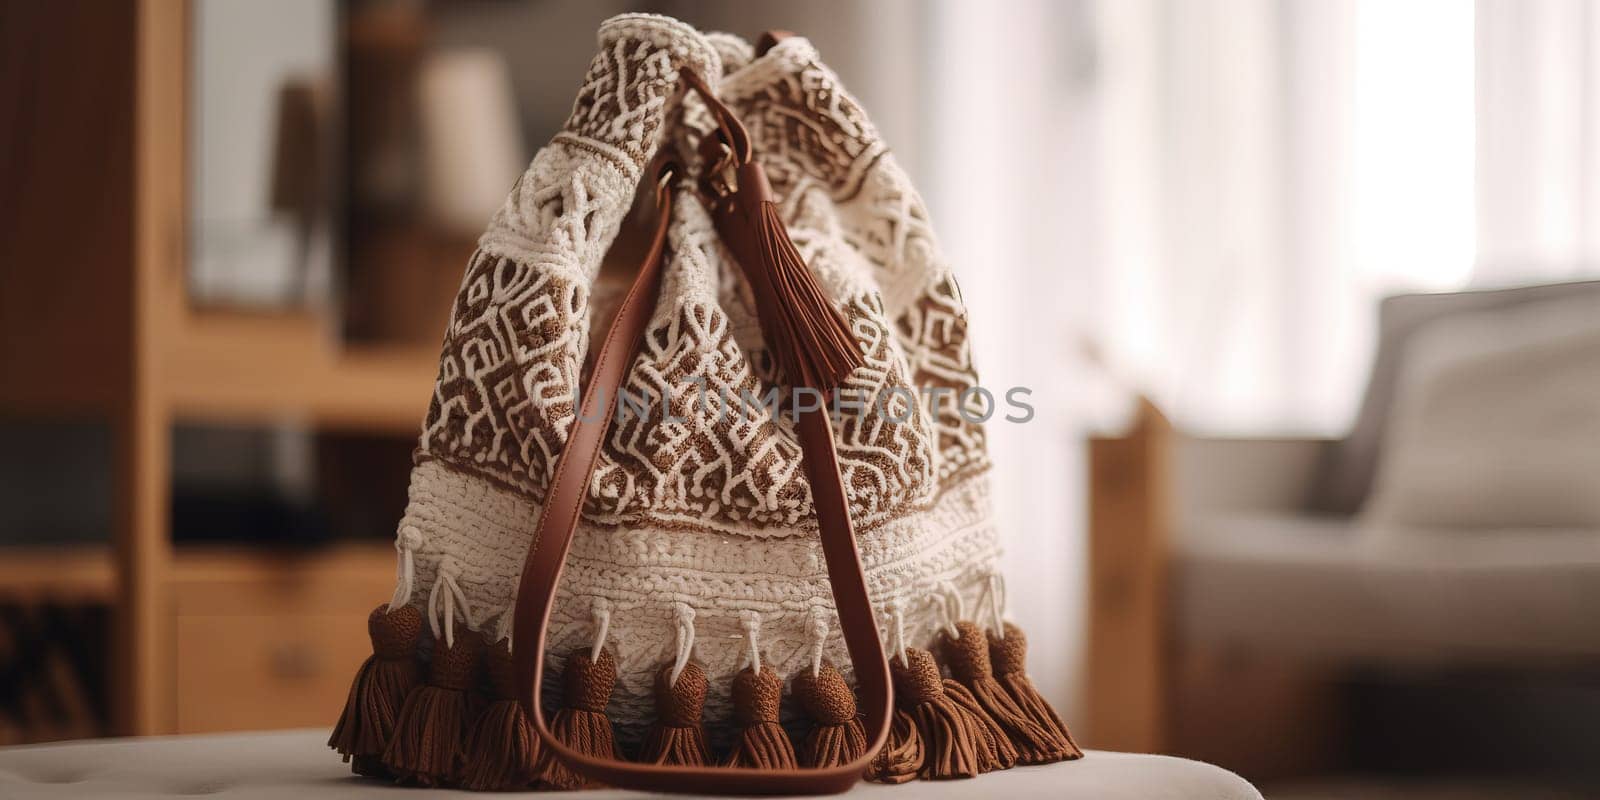 Handmade Boho Style Fabric Bag Rests On Table In Cozy Room